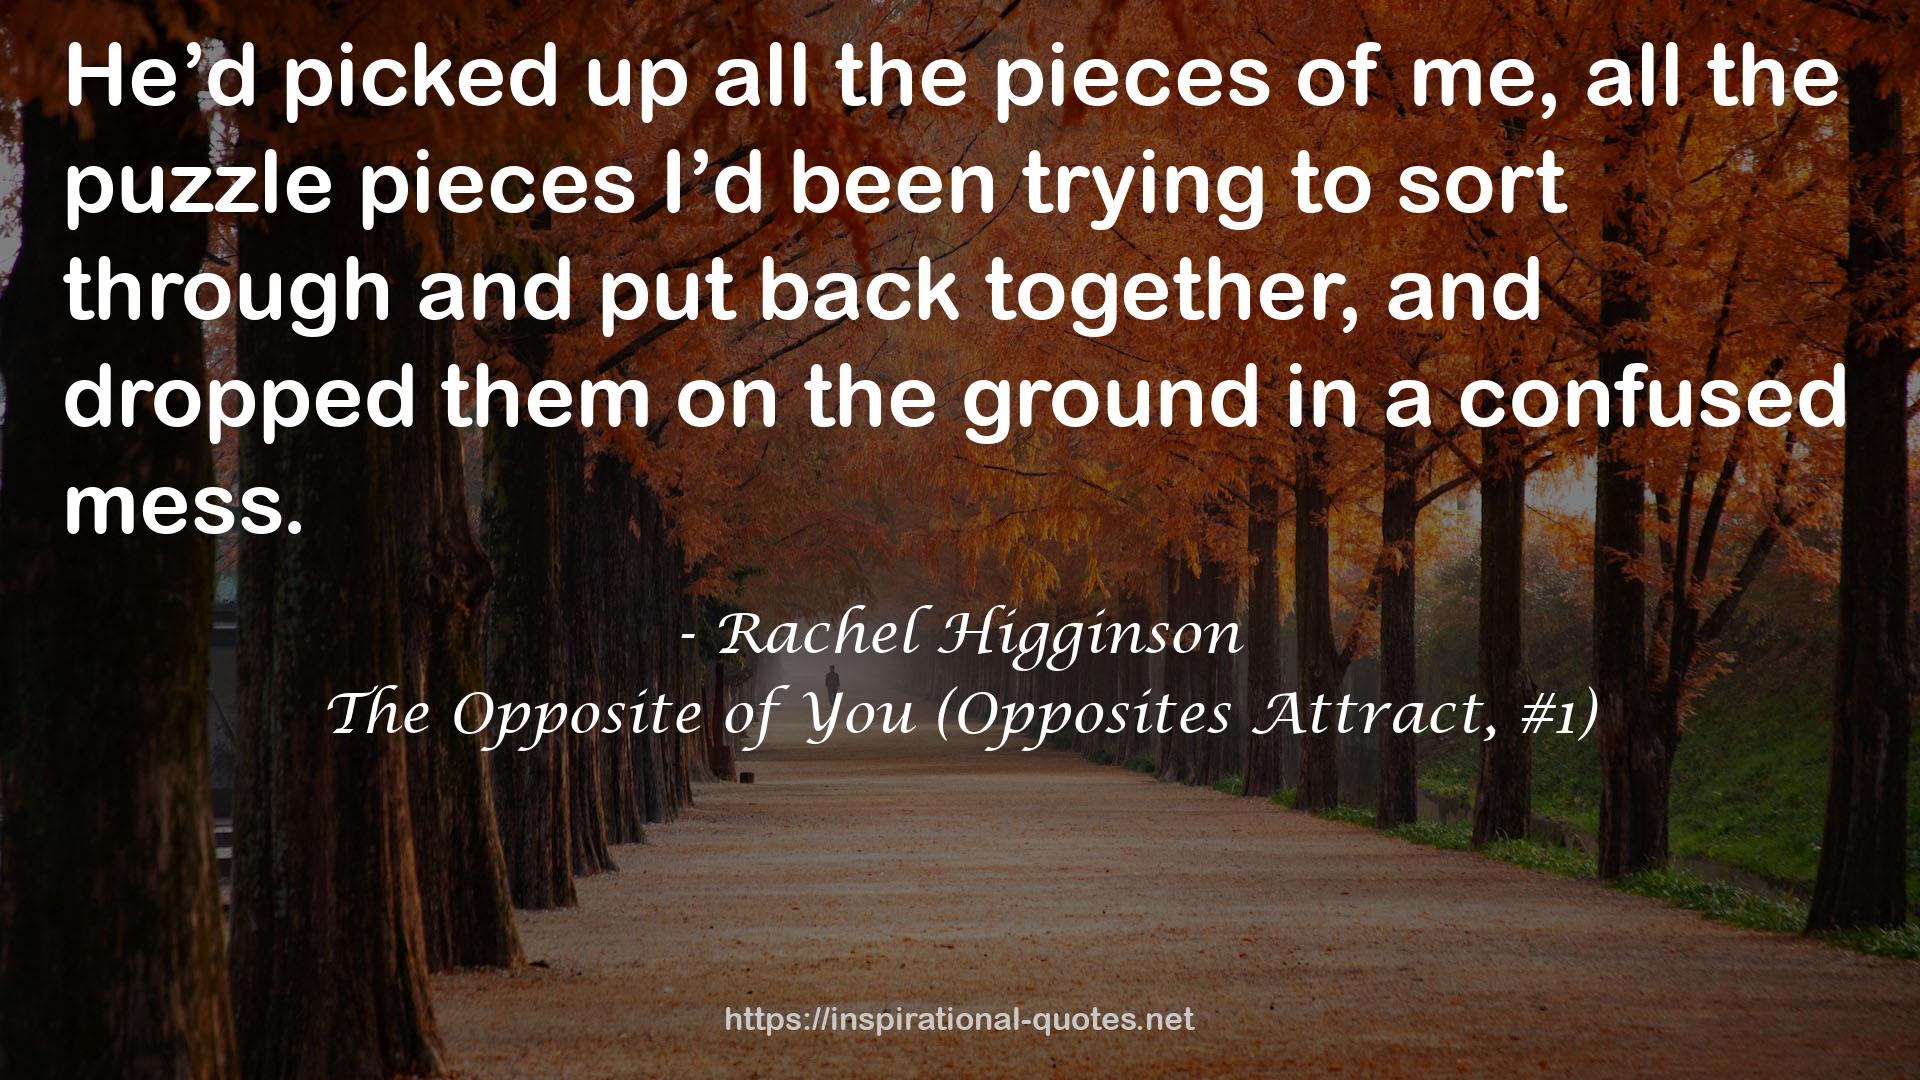 The Opposite of You (Opposites Attract, #1) QUOTES